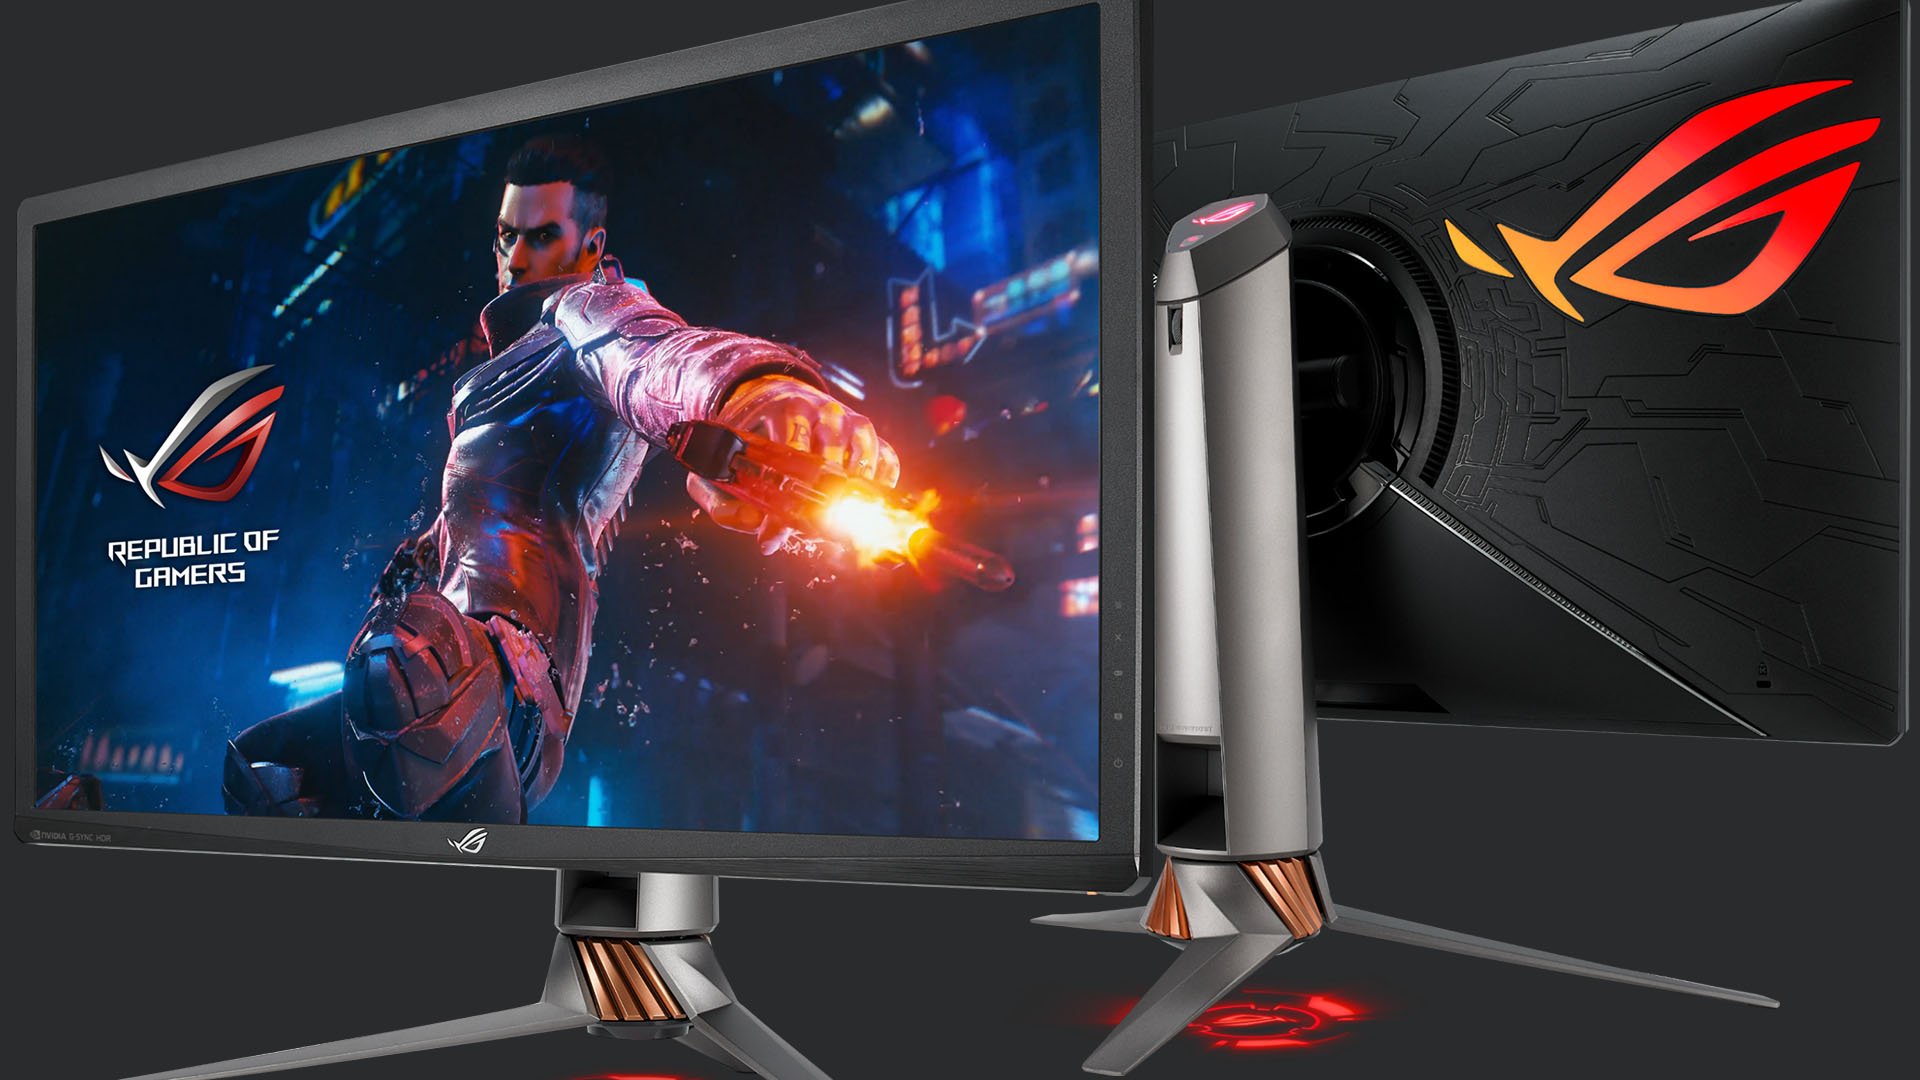 ASUS Shows Off ROG Swift PG32UQX Monitor: 4K-144, G-SYNC Ultimate, DisplayHDR 1400 | TechPowerUp